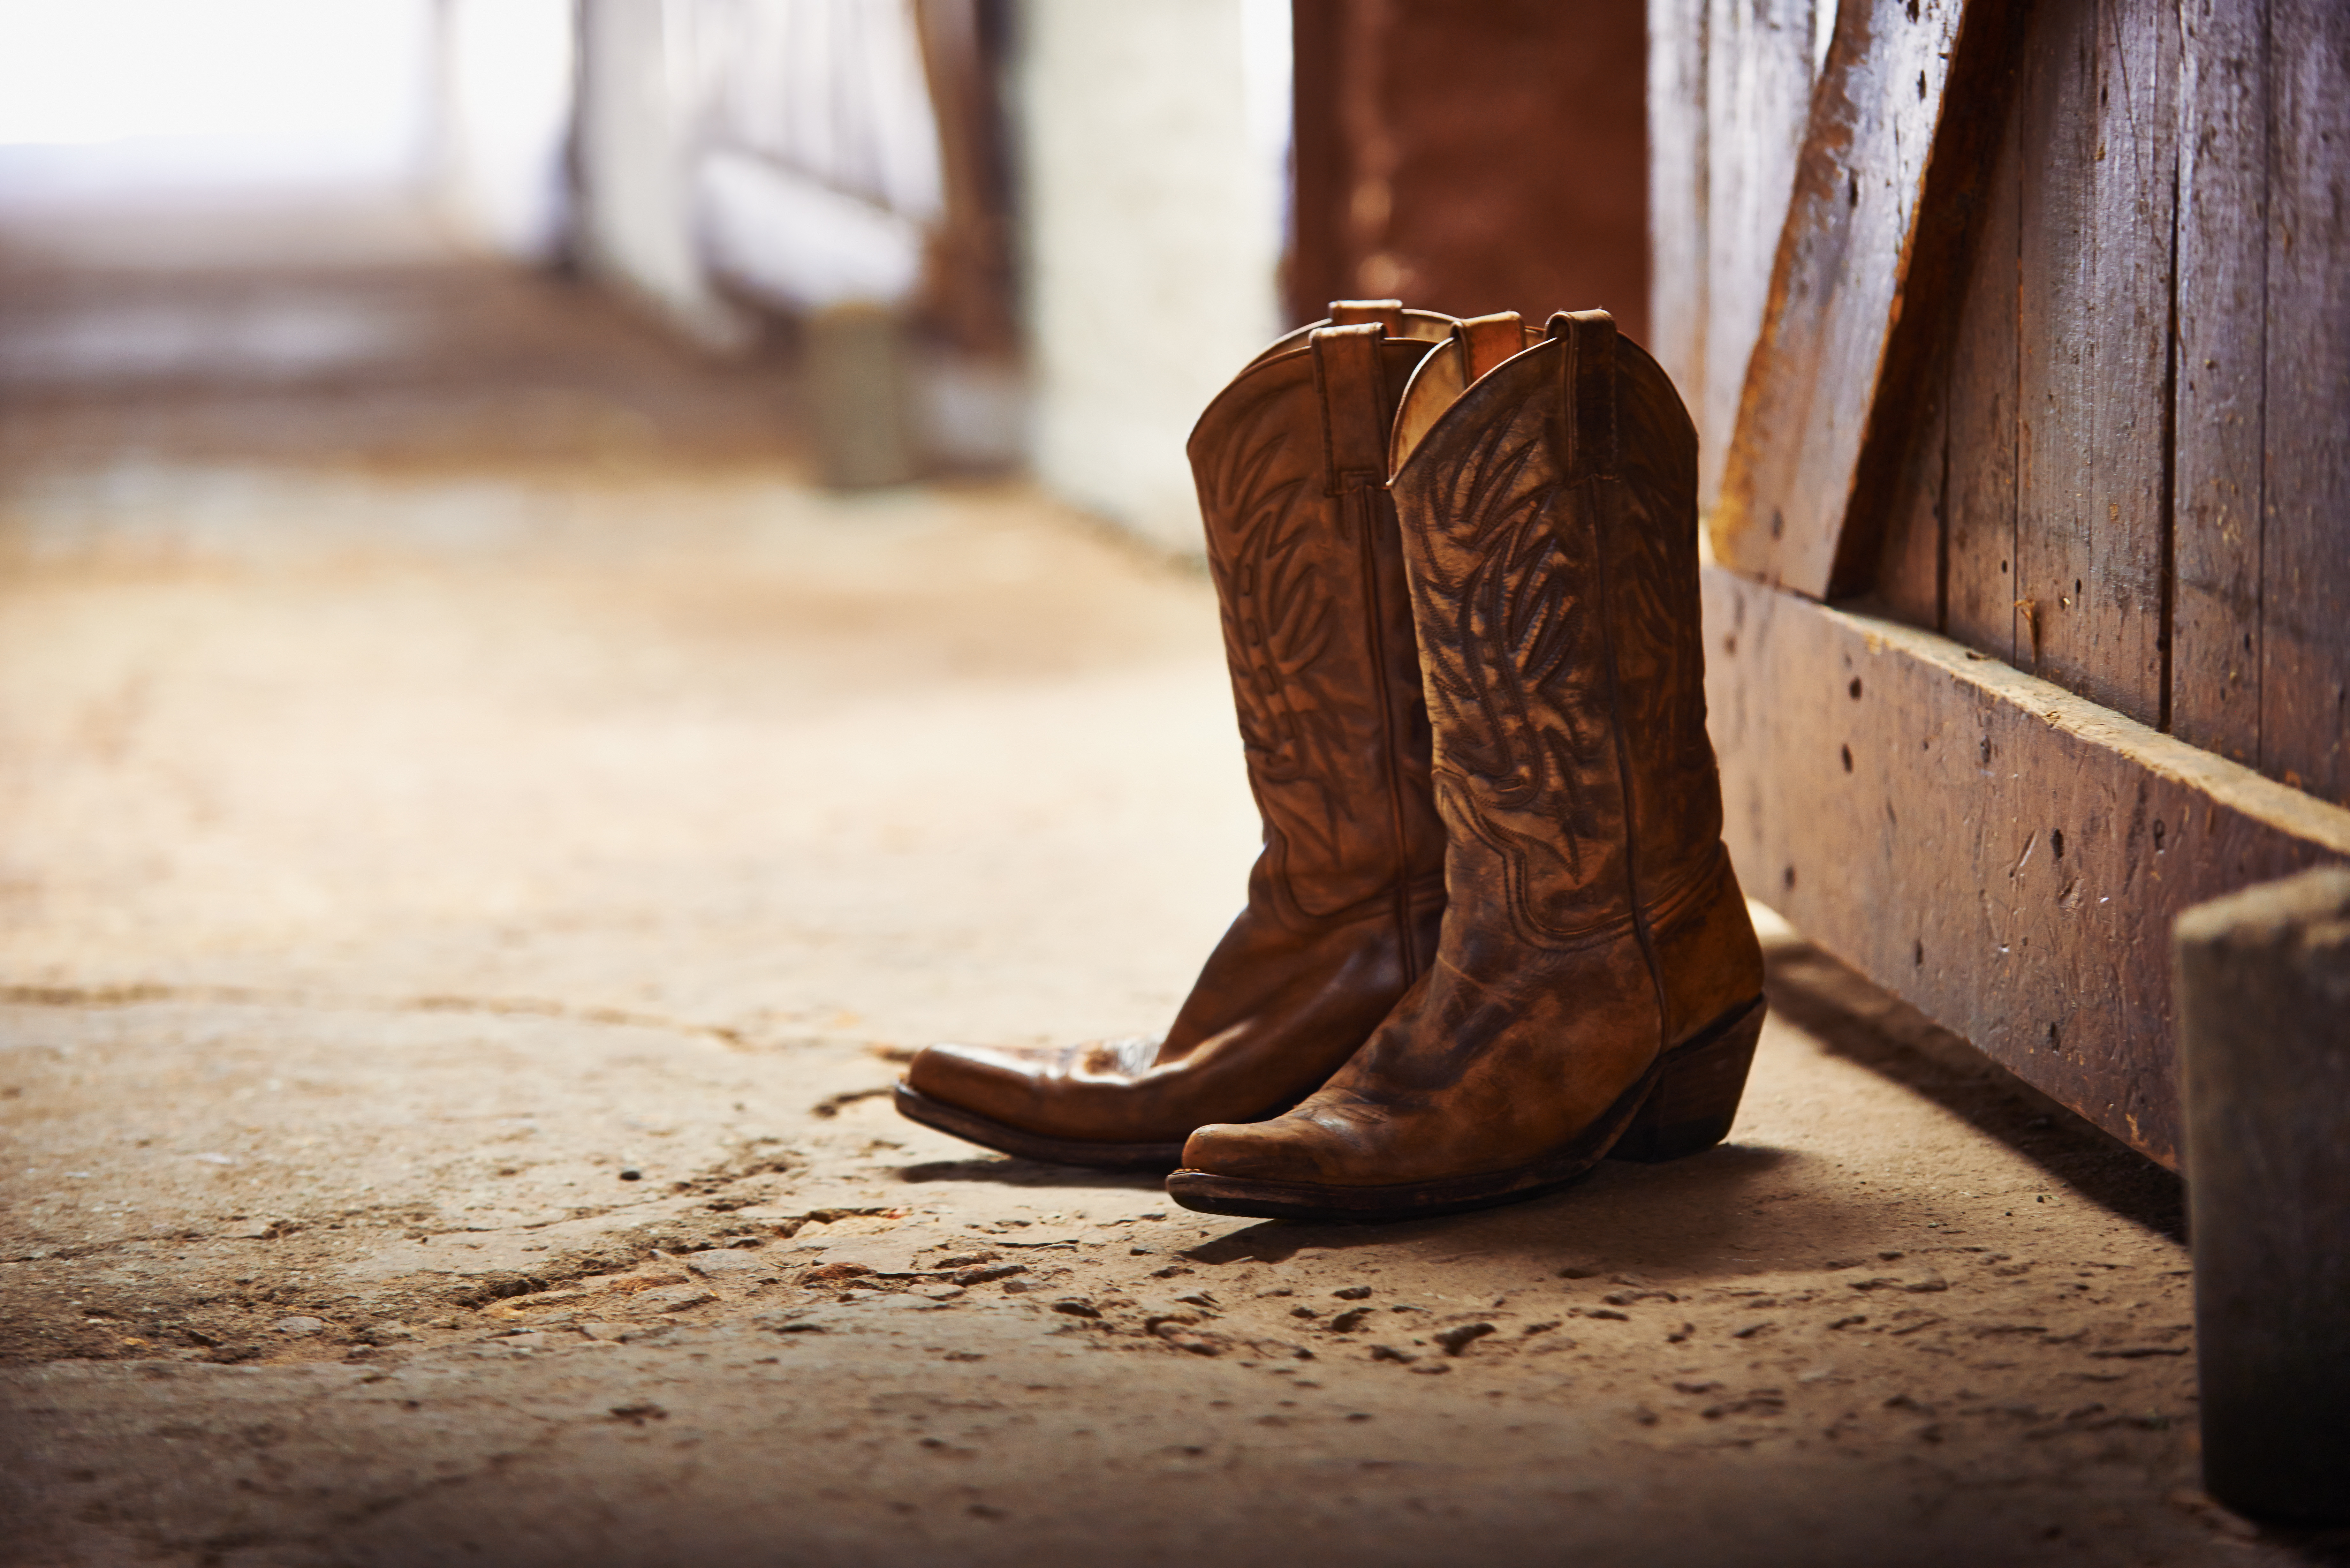 Another day done. Shot of a pair of cowboy boots in a barn.